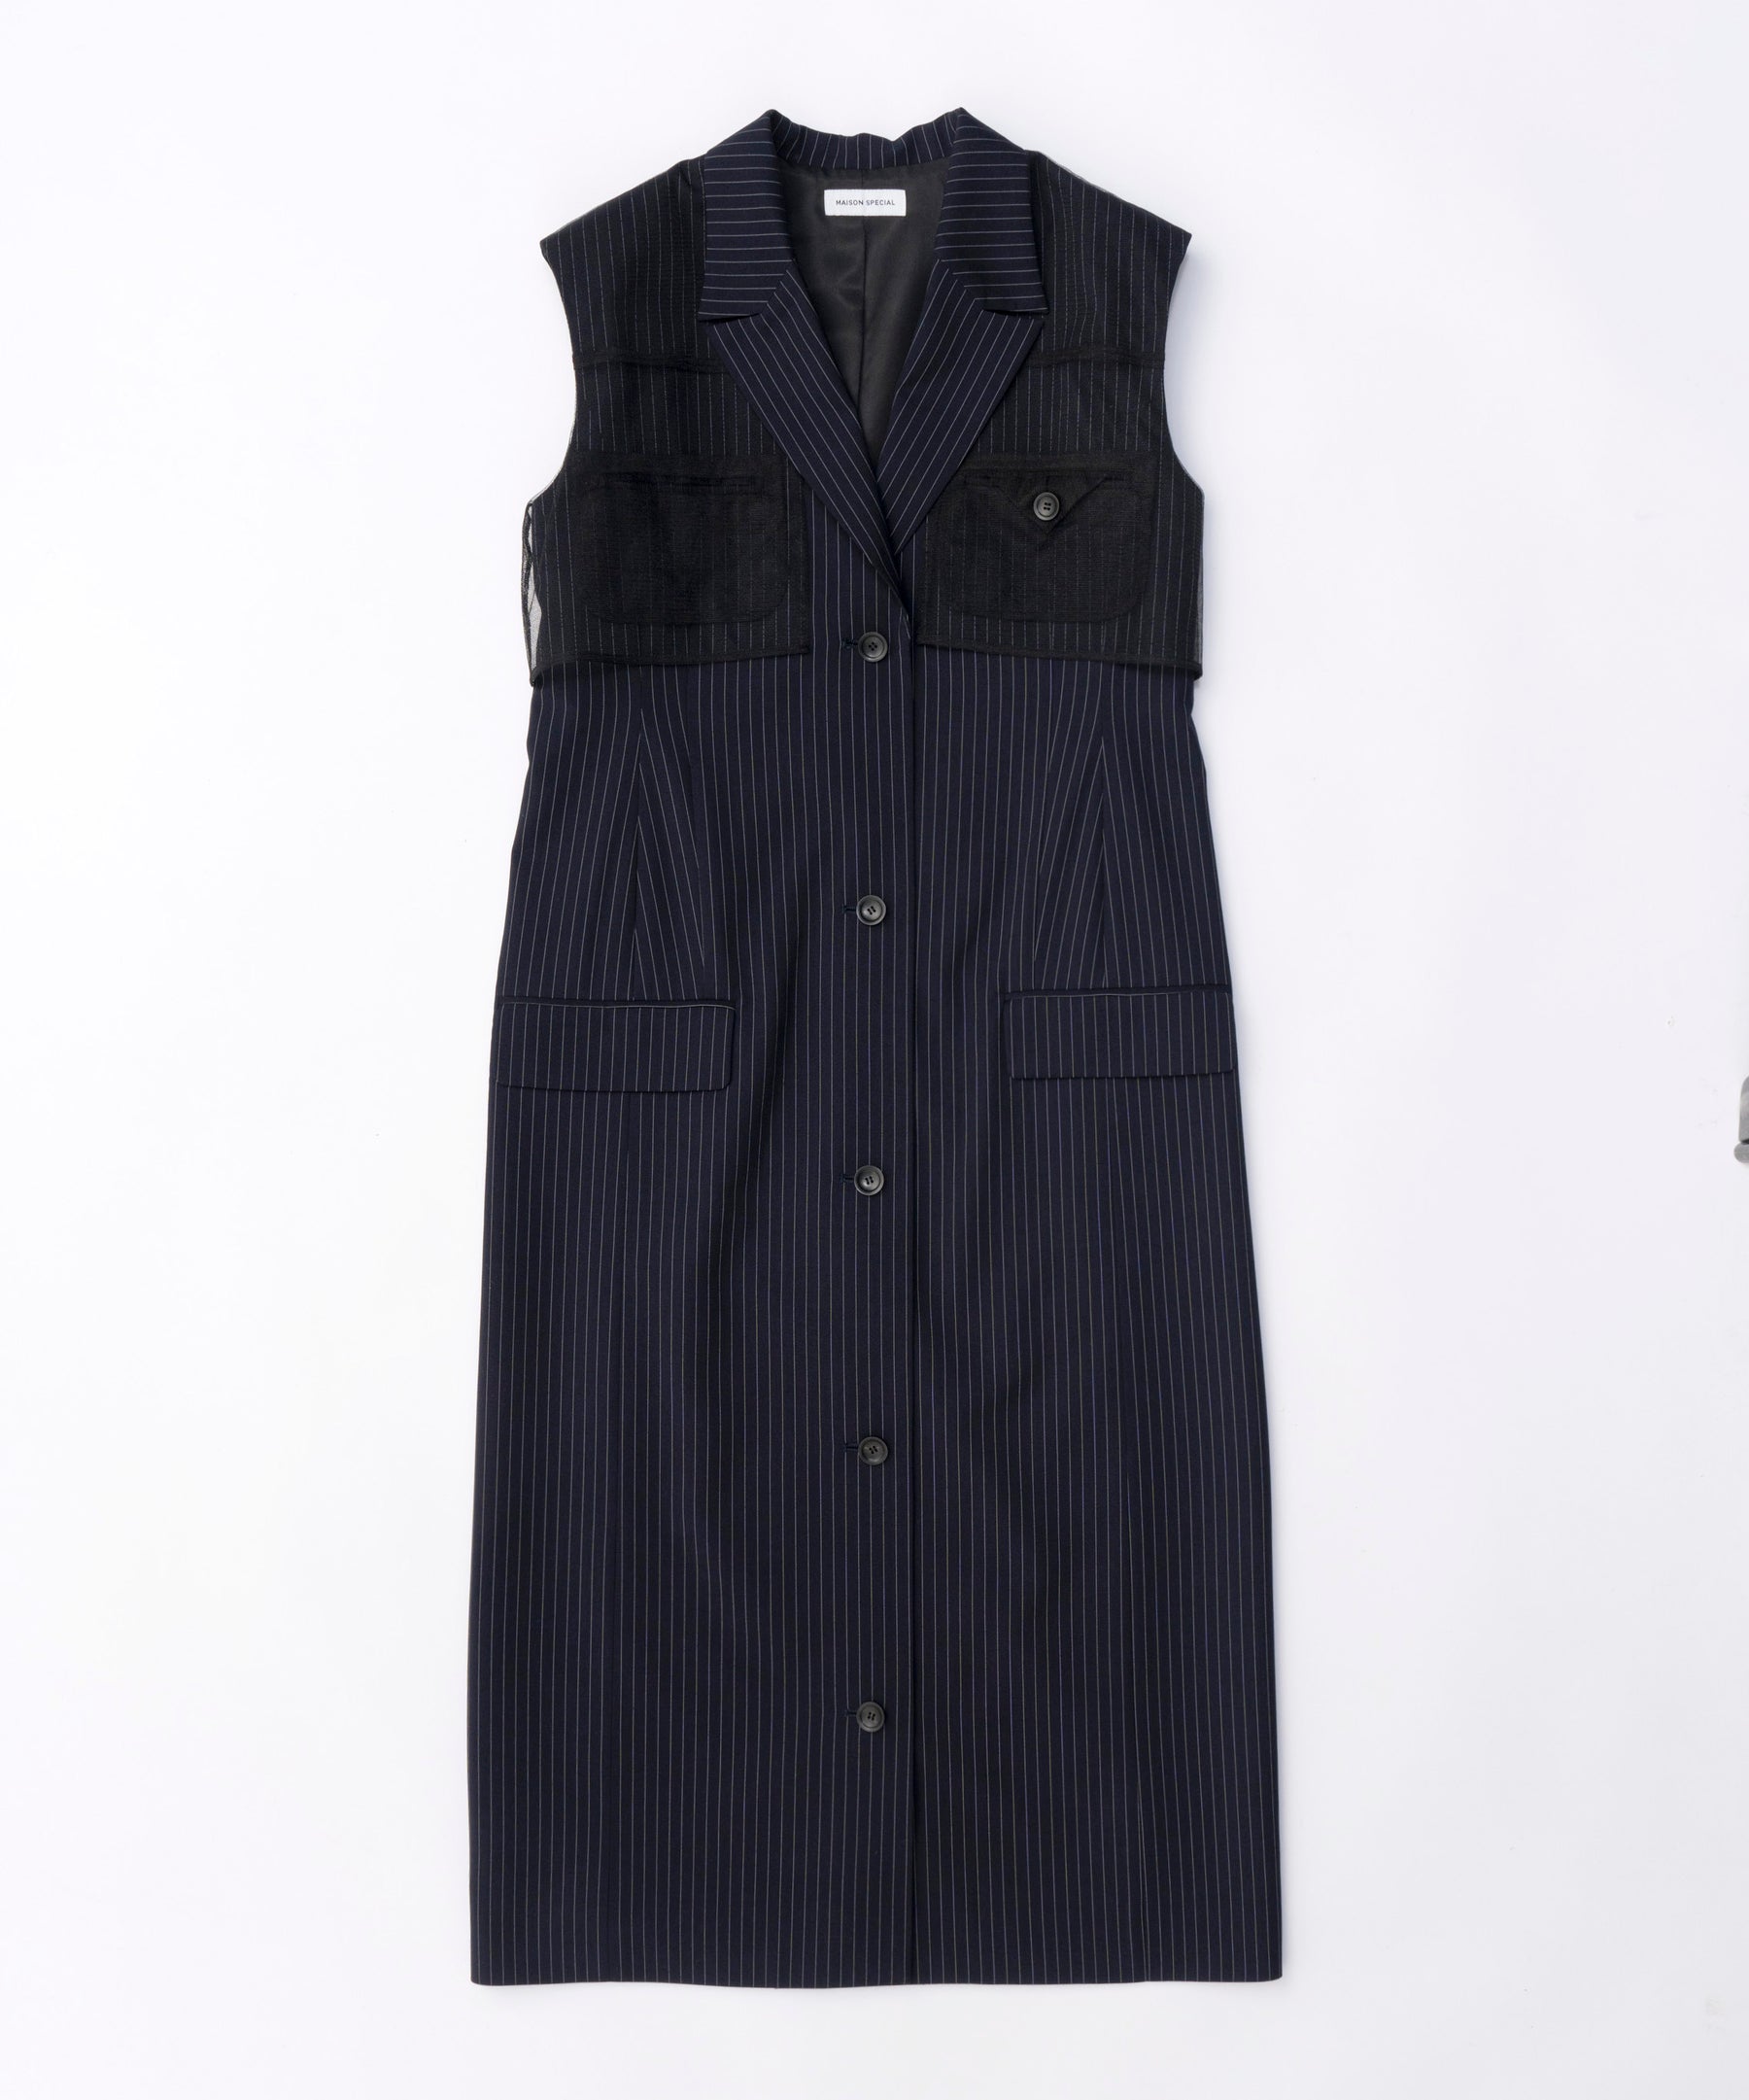 【24SPRING PRE-ORDER】Tailored Gilet One-piece Dress